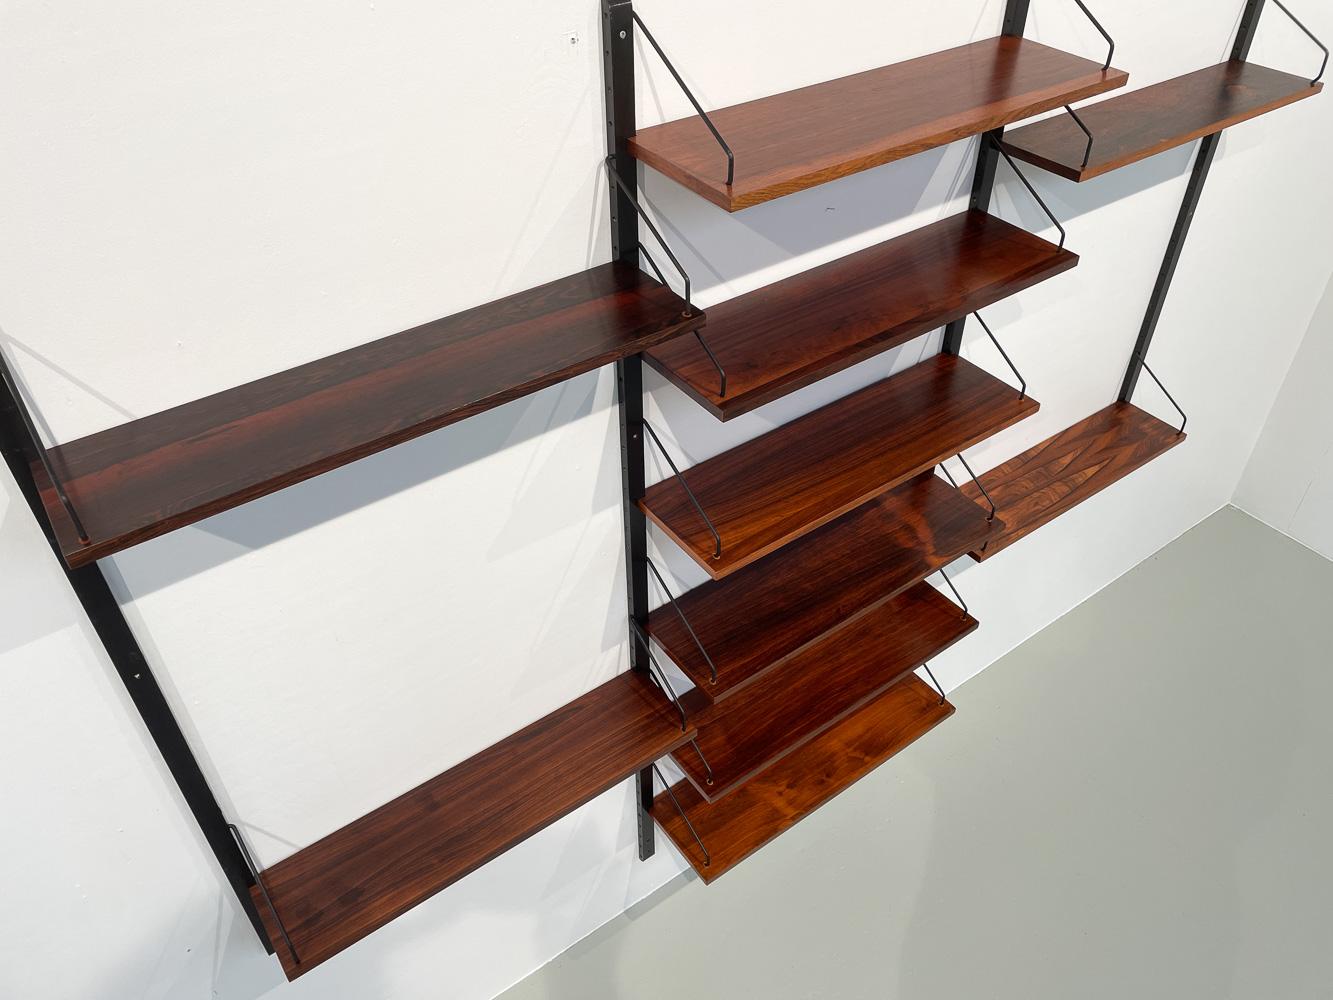 Mid-20th Century Danish Modern Modular Rosewood Wall Unit by Poul Cadovius for Cado, 1960s